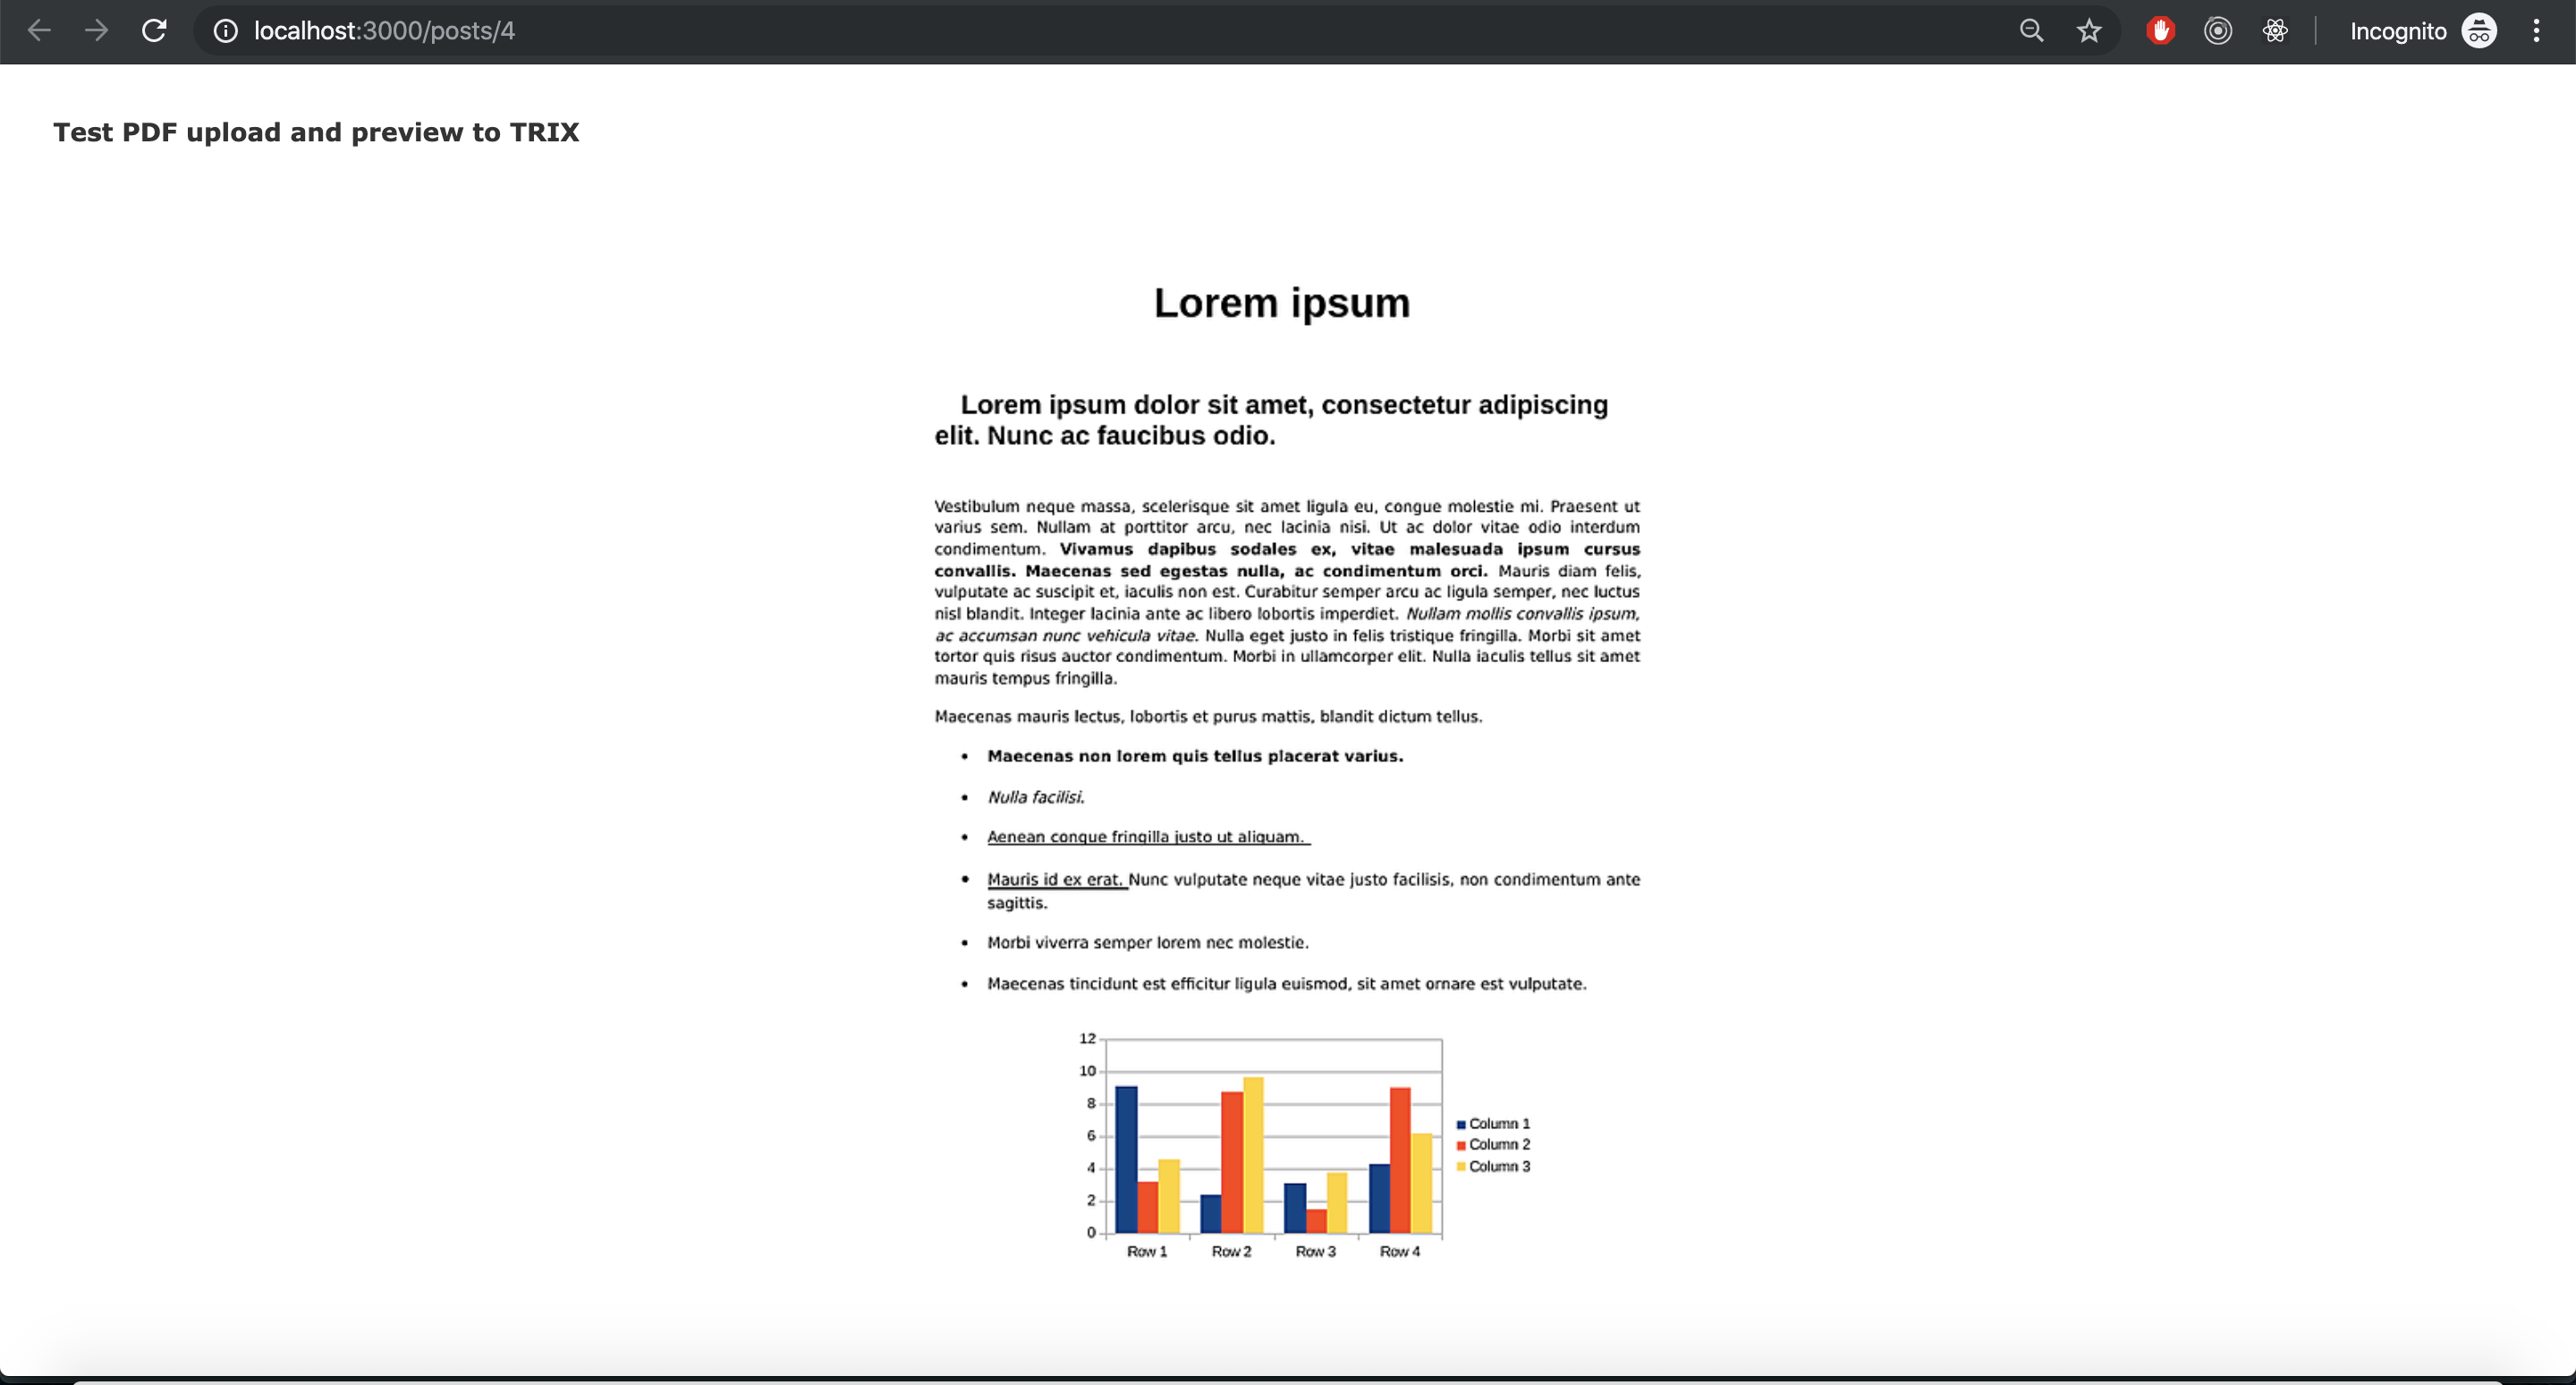 Reloading the  after installing poppler. We can now see the preview of the 1st page of the attached PDF.